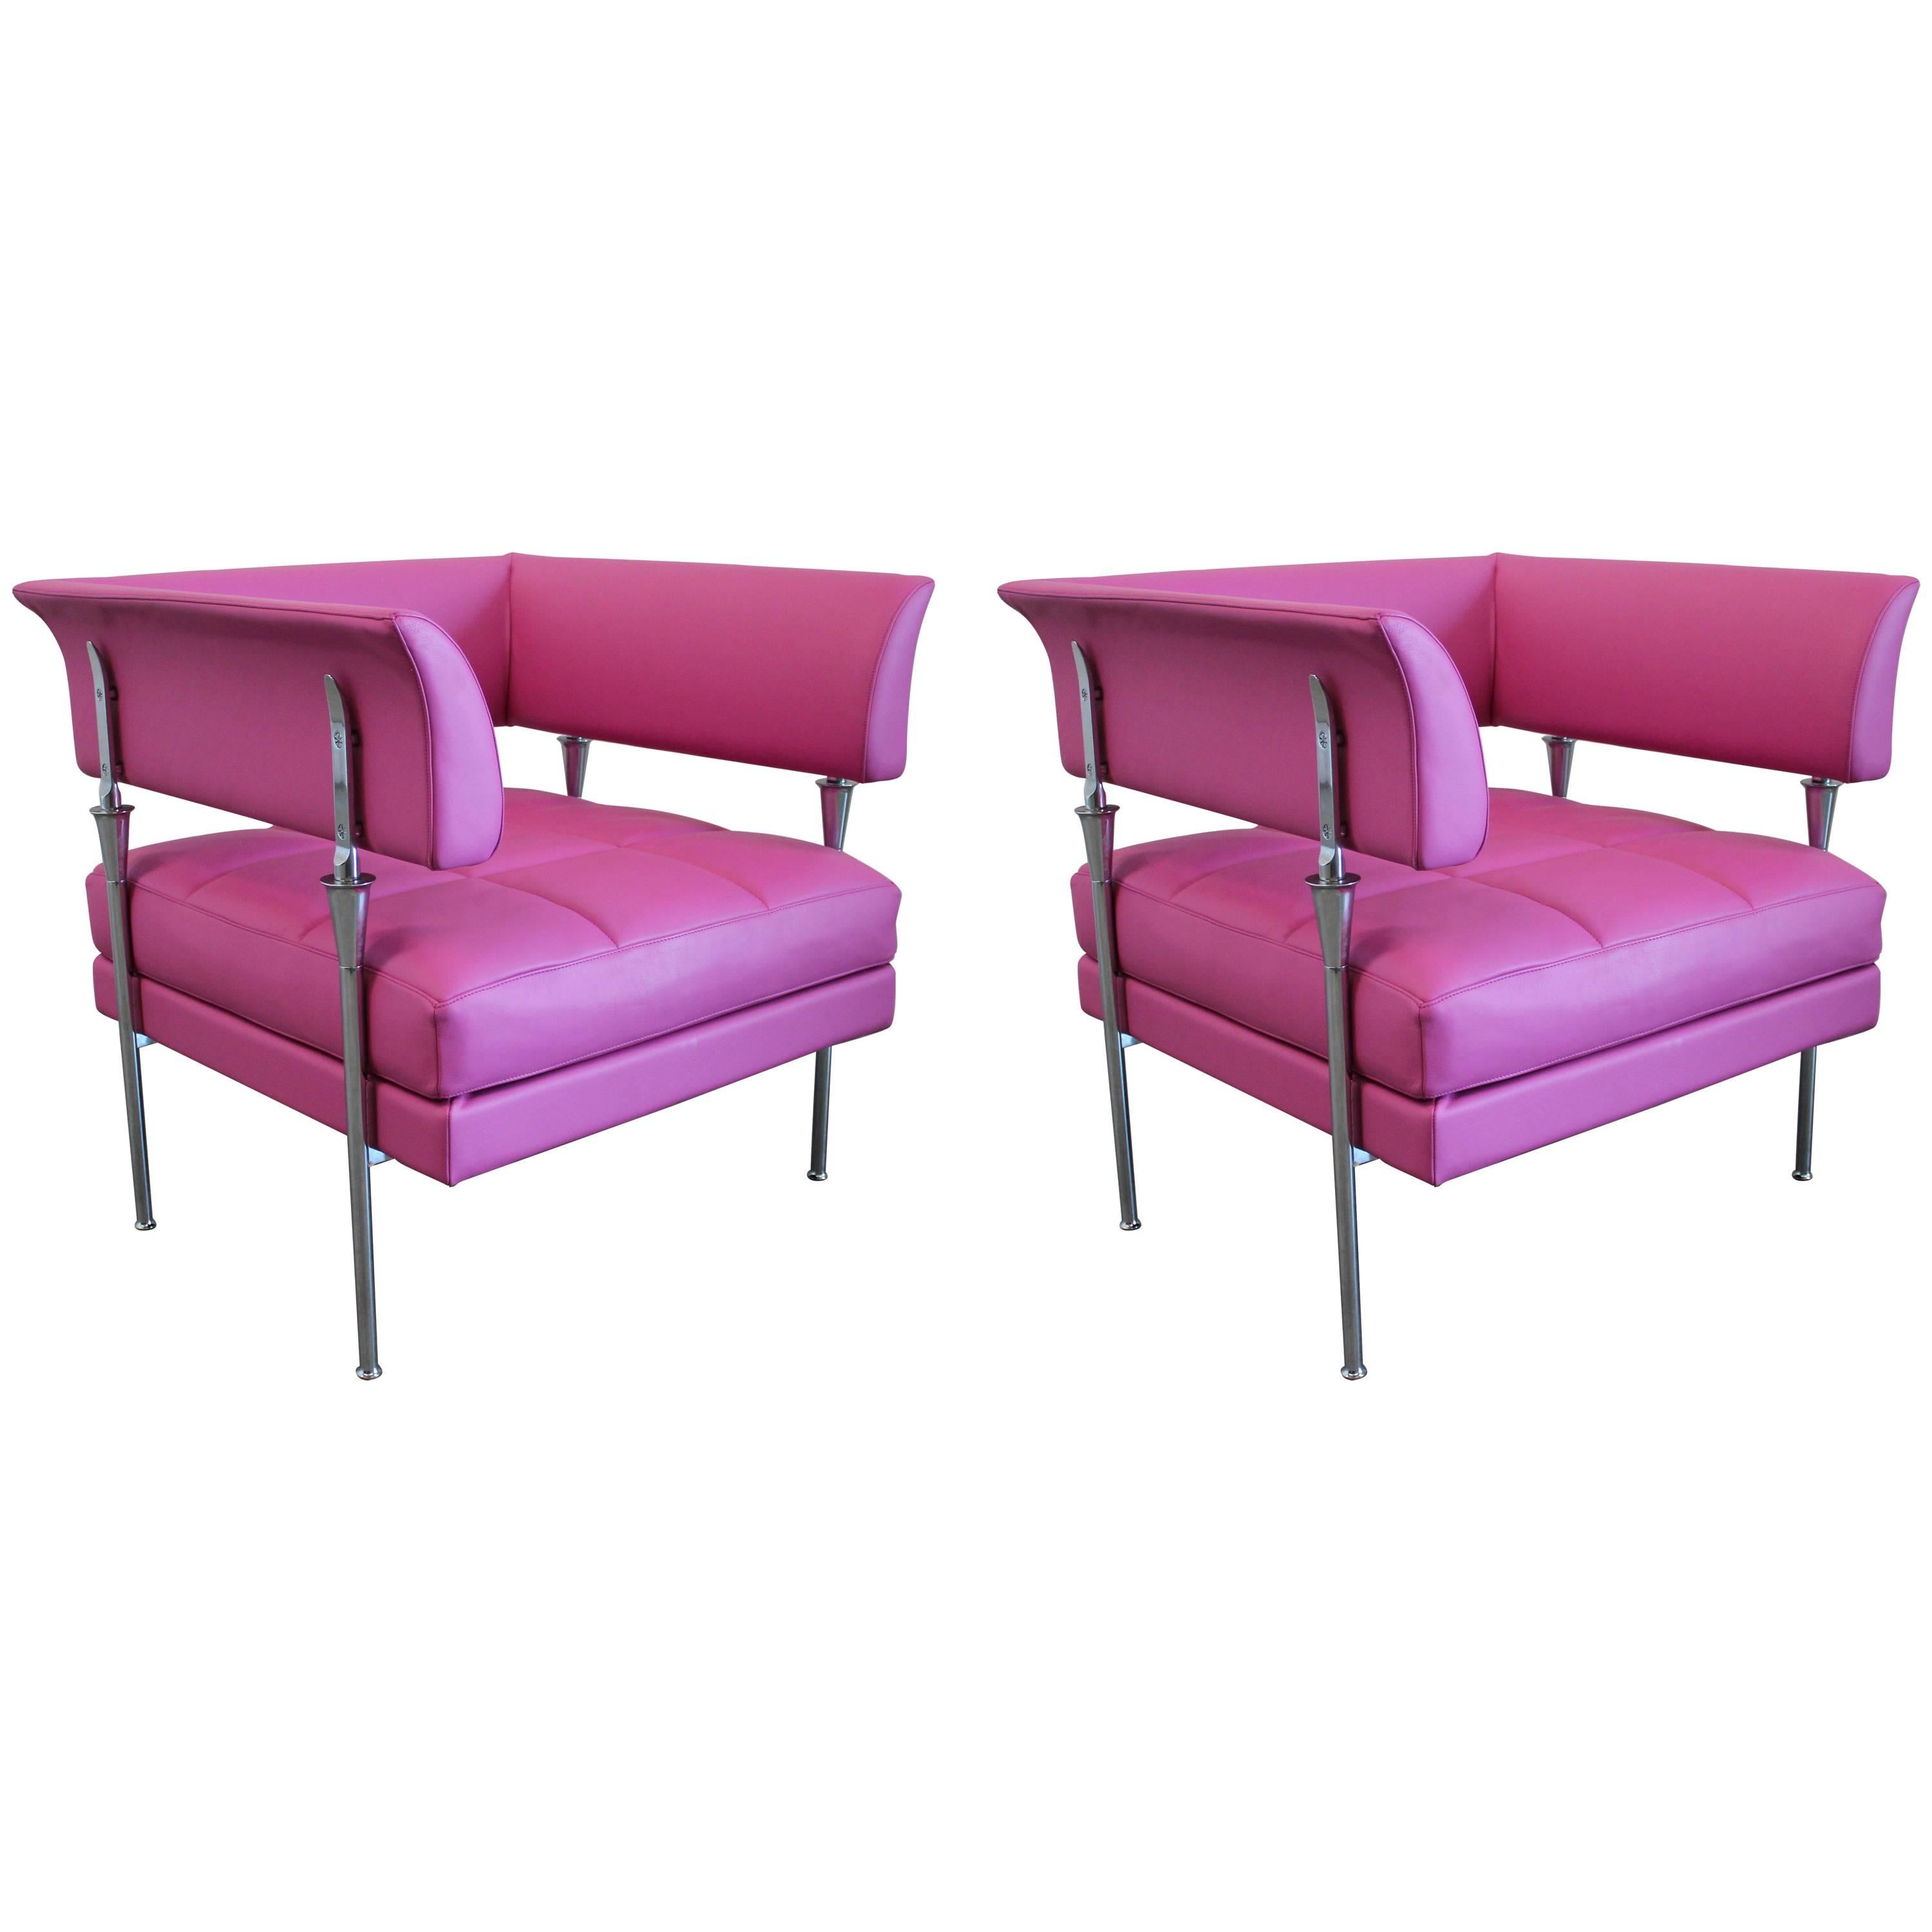 Poltrona Frau "Hydra Enif" Armchair in Pink "Pelle" Leather by Luca Scacchetti